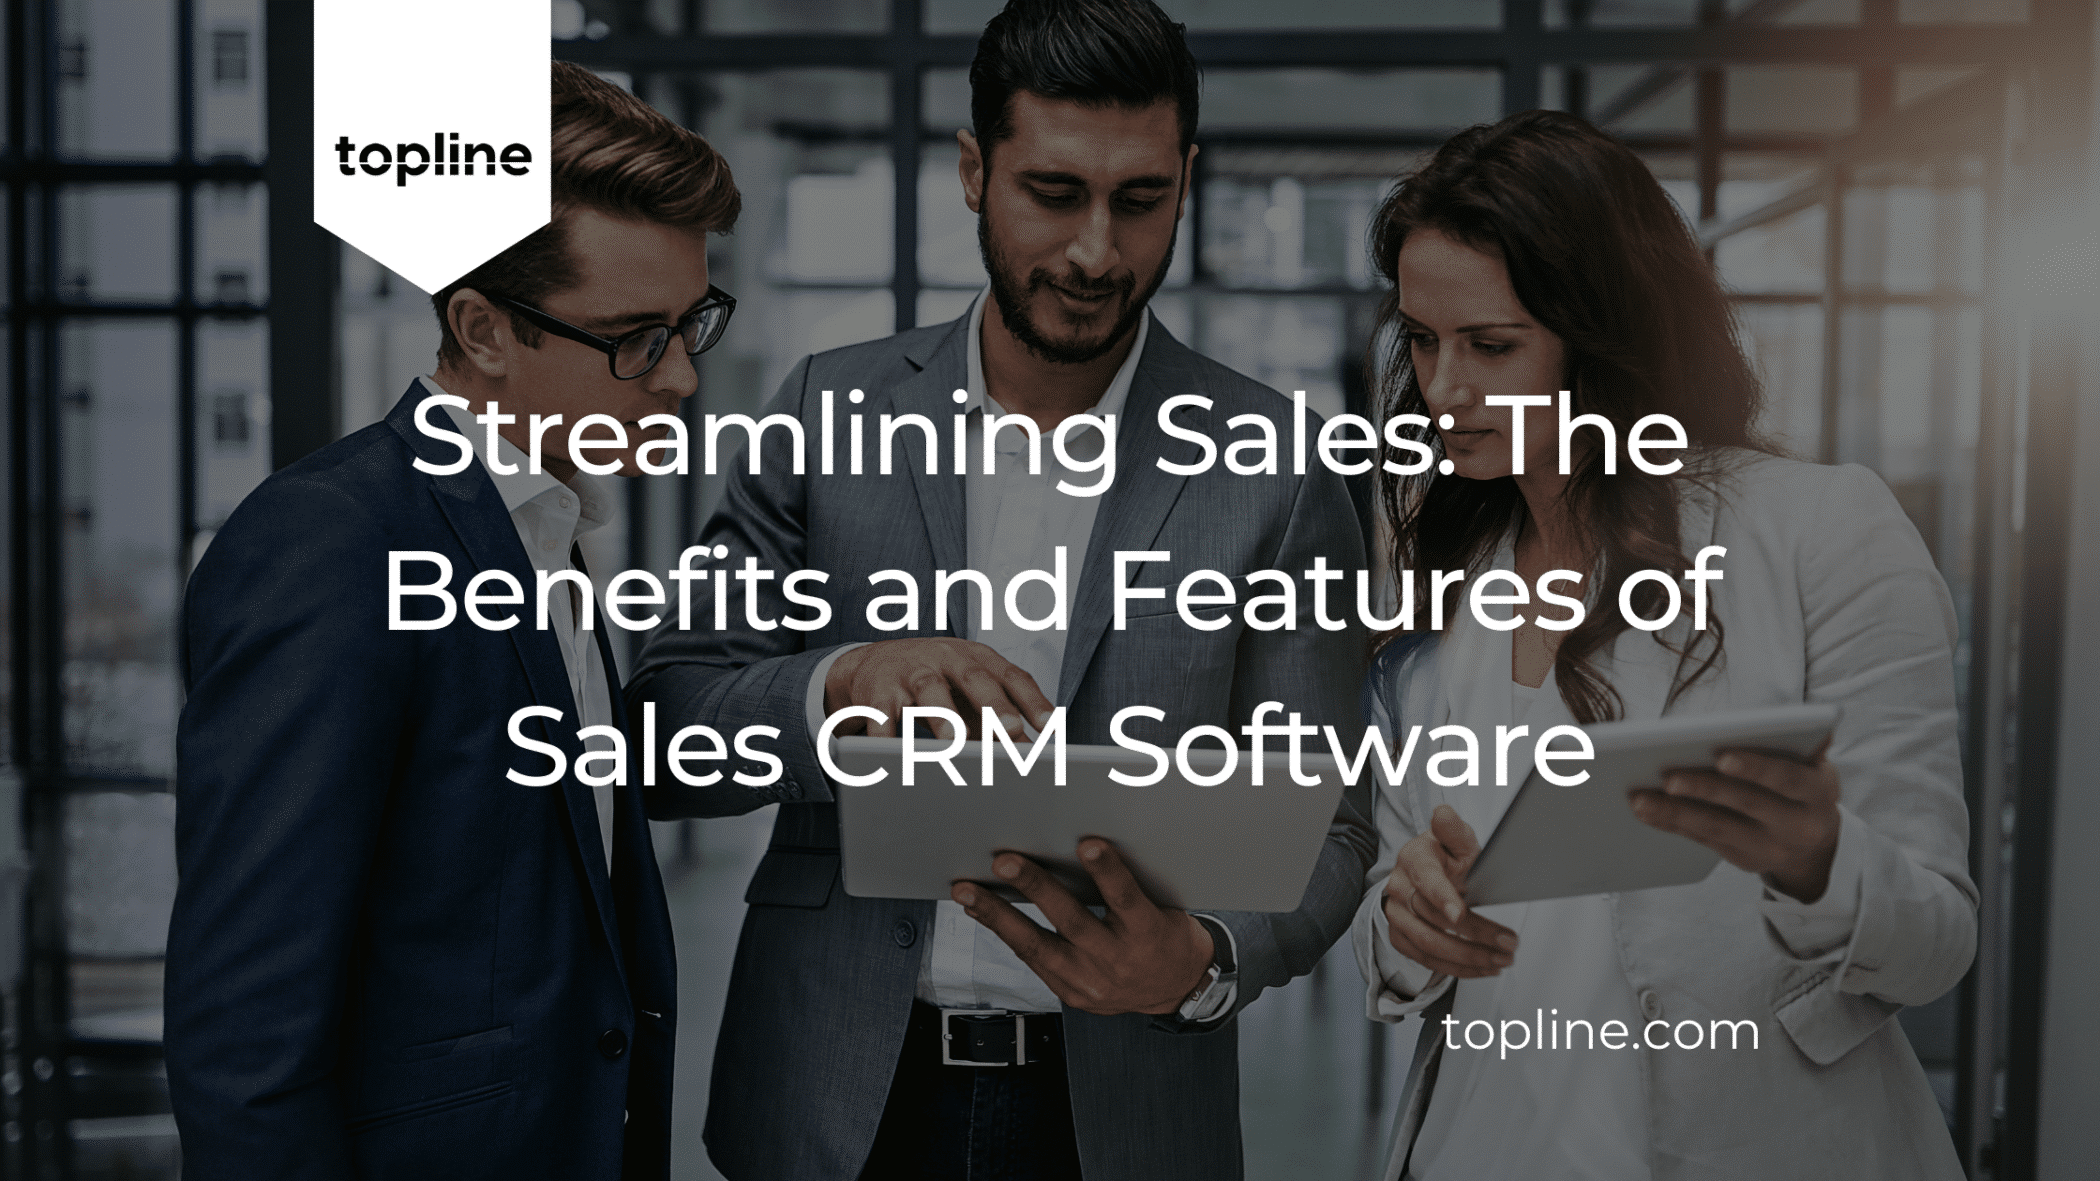 Streamlining Sales: The benefits and features of sales CRM software